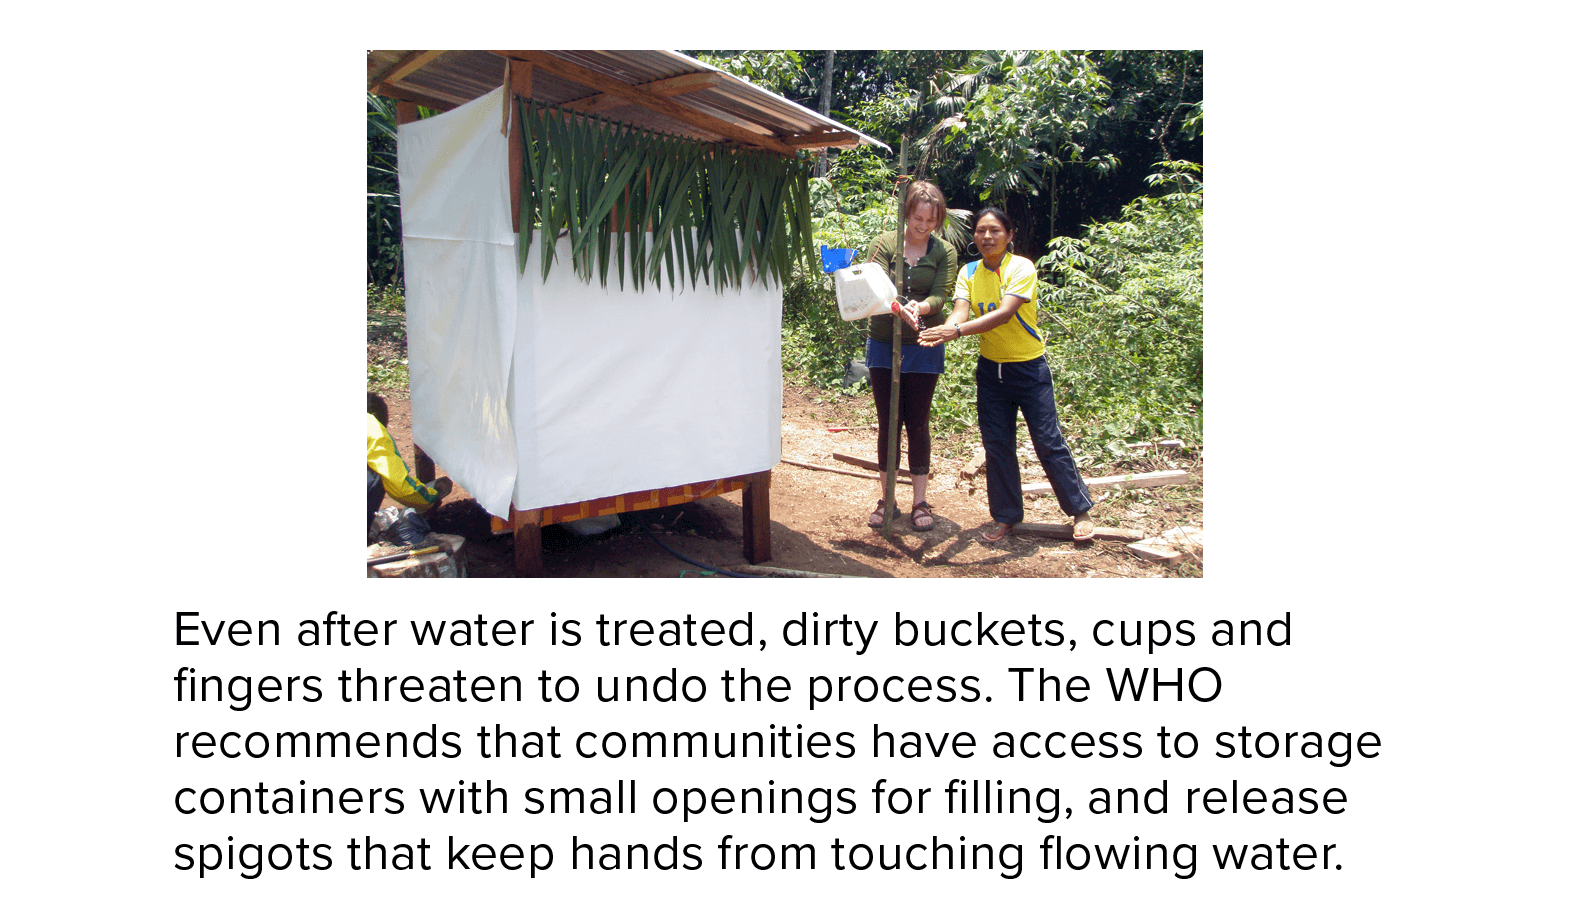 Even after water is treated, dirty buckets, cups and fingers threaten to undo the process. The WHO recommends that communities have access to storage containers with small openings for filling, and release spigots that keep hands from touching flowing water. A photograph shows a woman in Ecuador washing her hands with such a set-up.